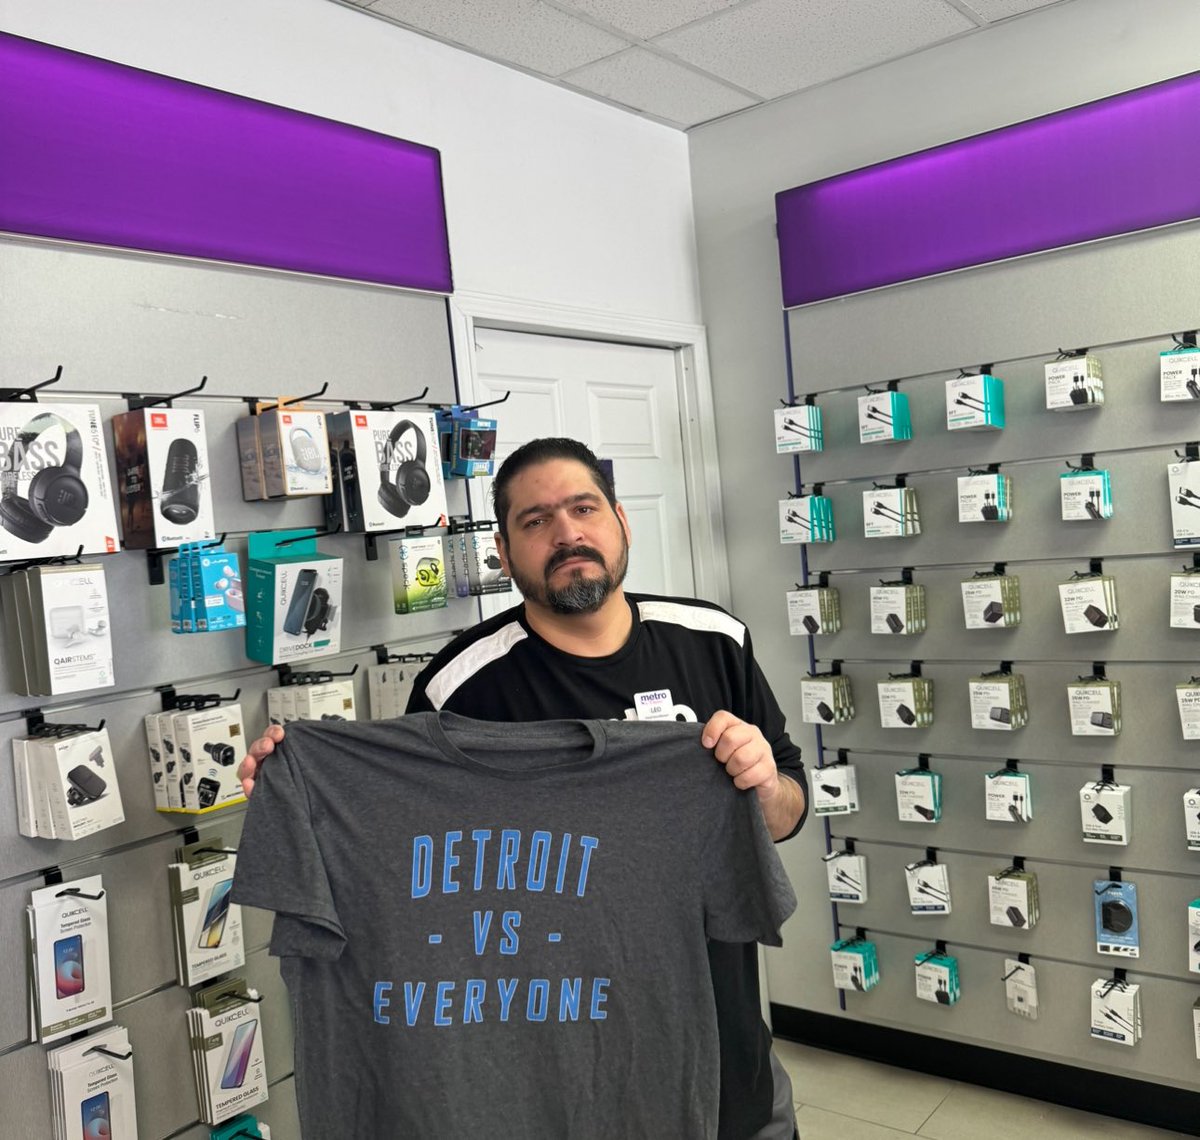 Woke up and texted the Detroit Downtown district: Salespeople are relationship builders who provide value and help their customers win!!!!!!! #DetroitGrind #DetroitvsEveryone @b_barkoff @WinstonAwadzi